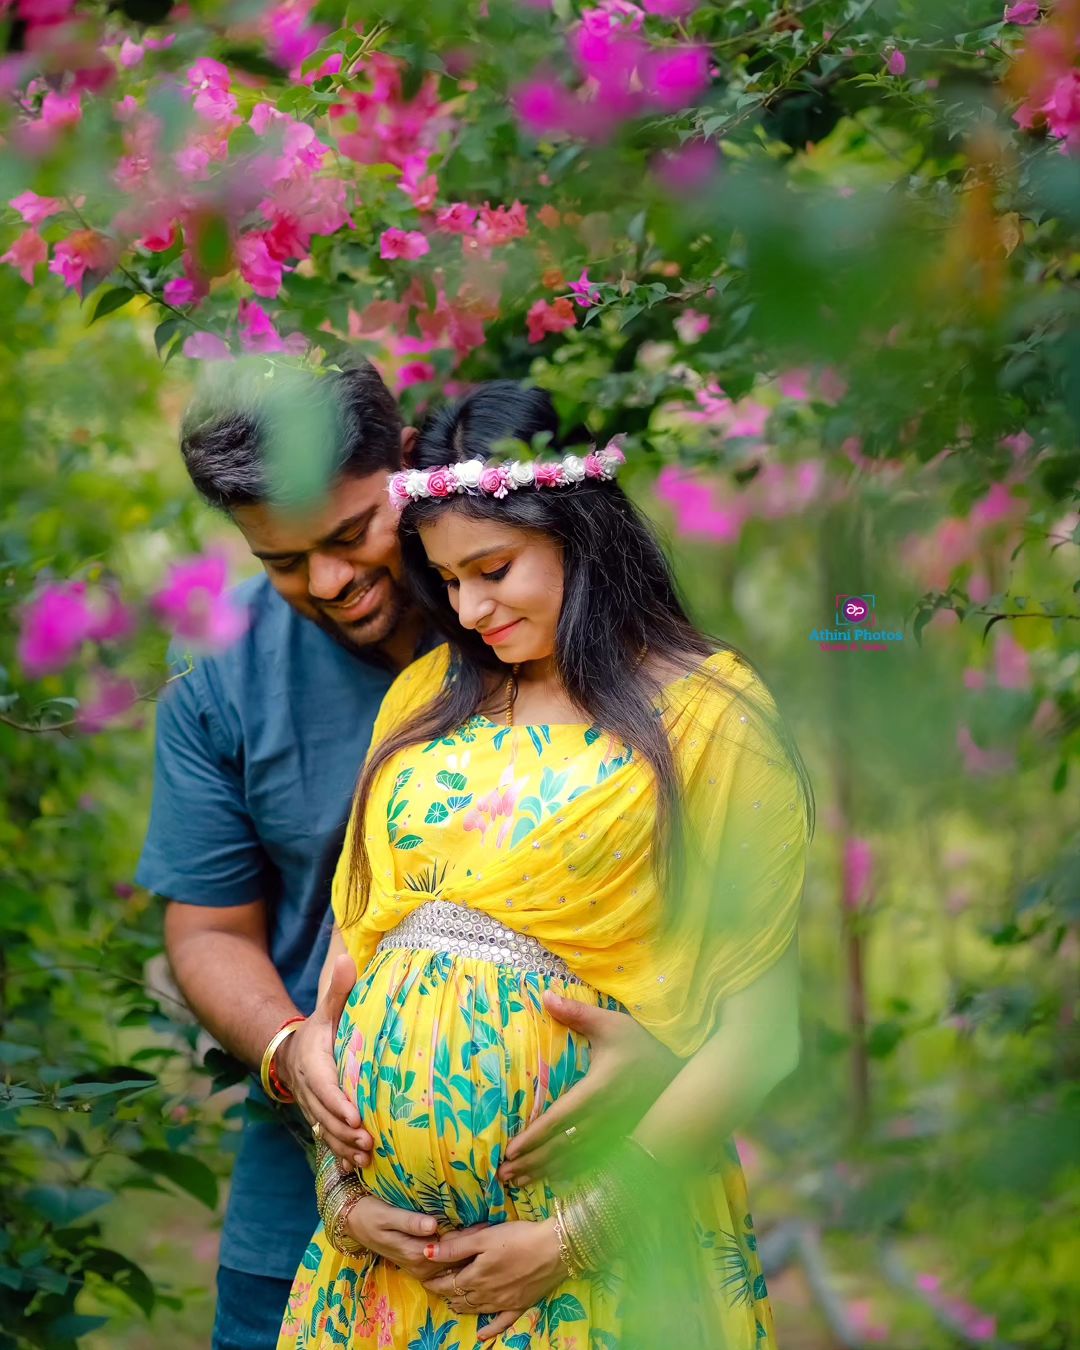 Top 5 Best Maternity Poses + Prompts for Natural Pregnancy Photos